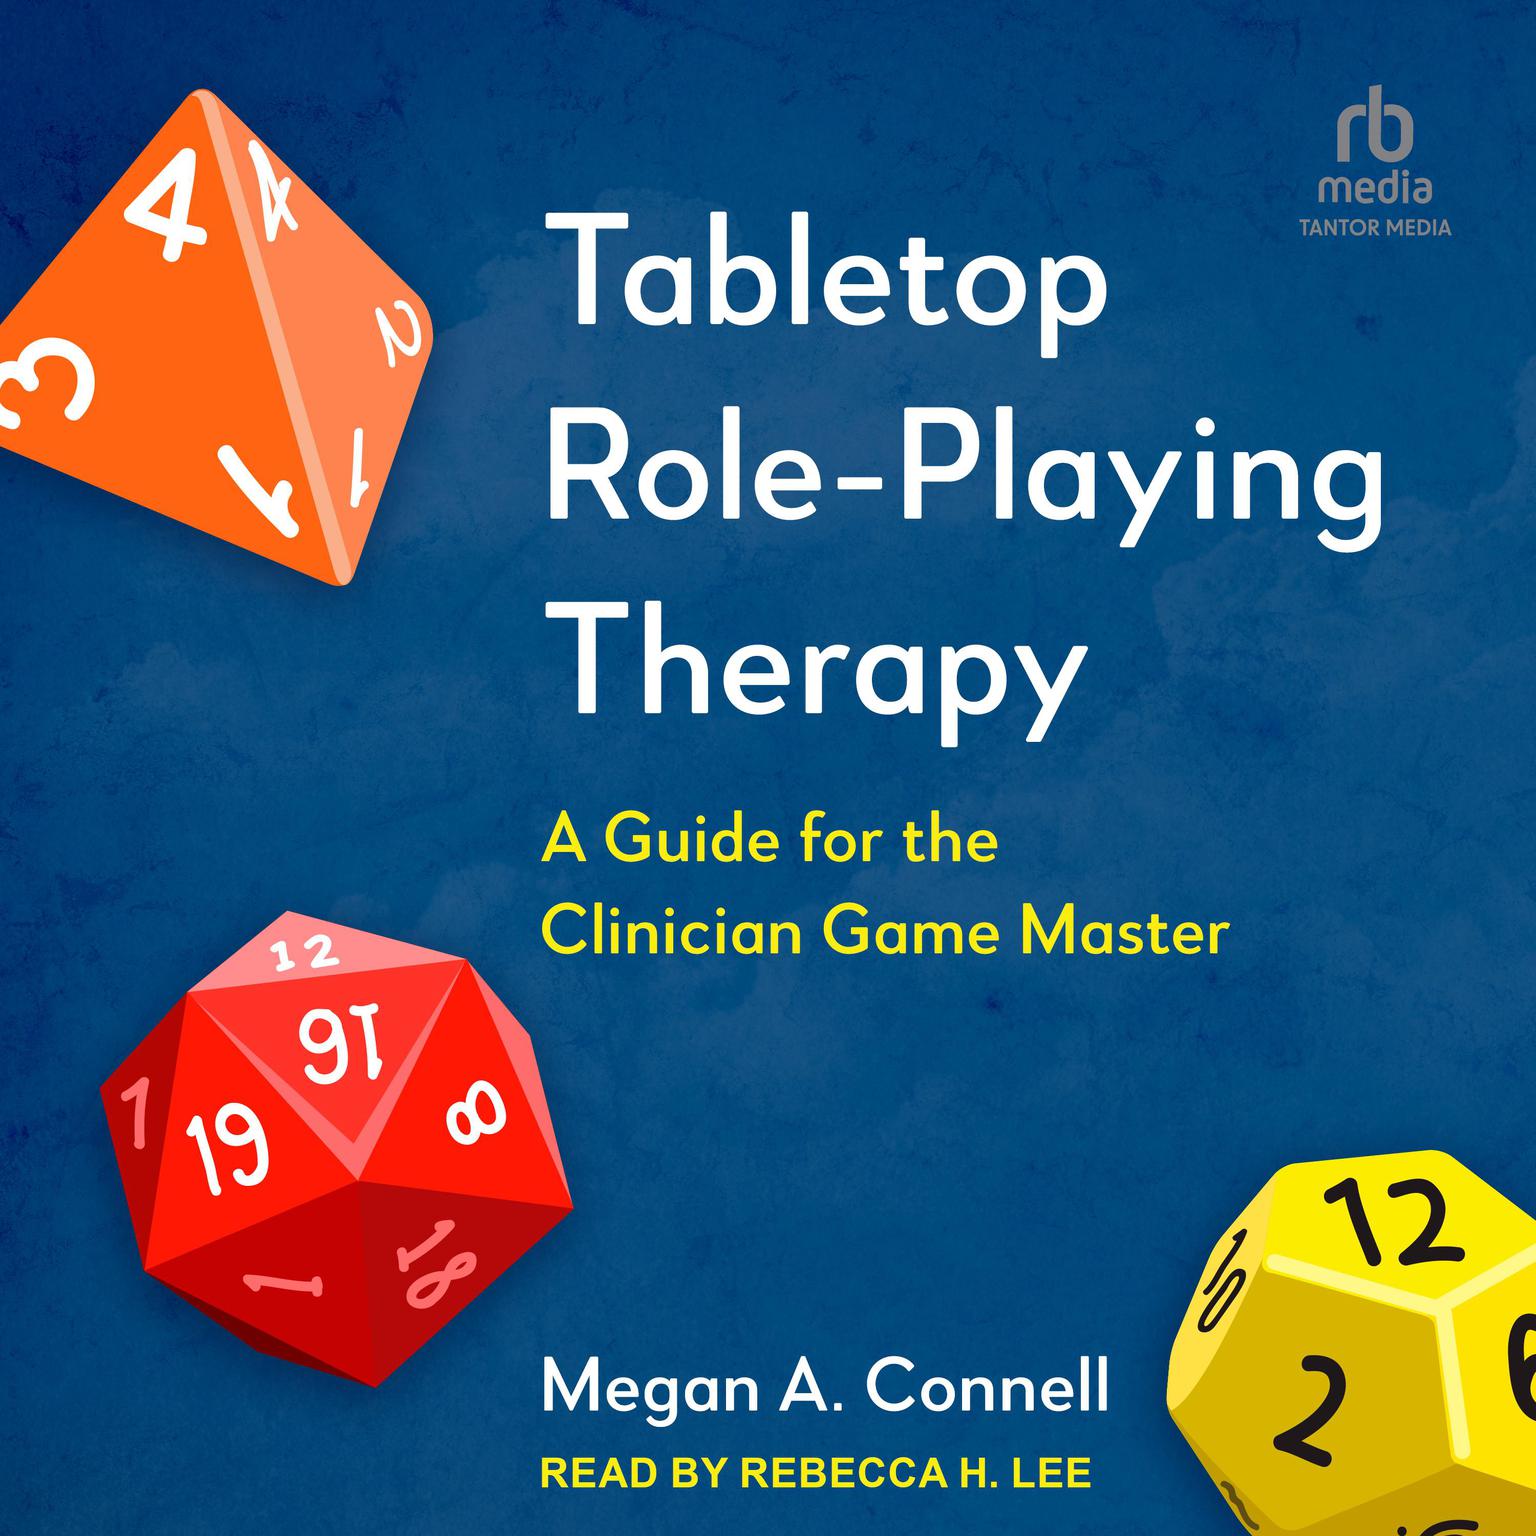 Tabletop Role-Playing Therapy: A Guide for the Clinician Game Master Audiobook, by Megan A. Connell